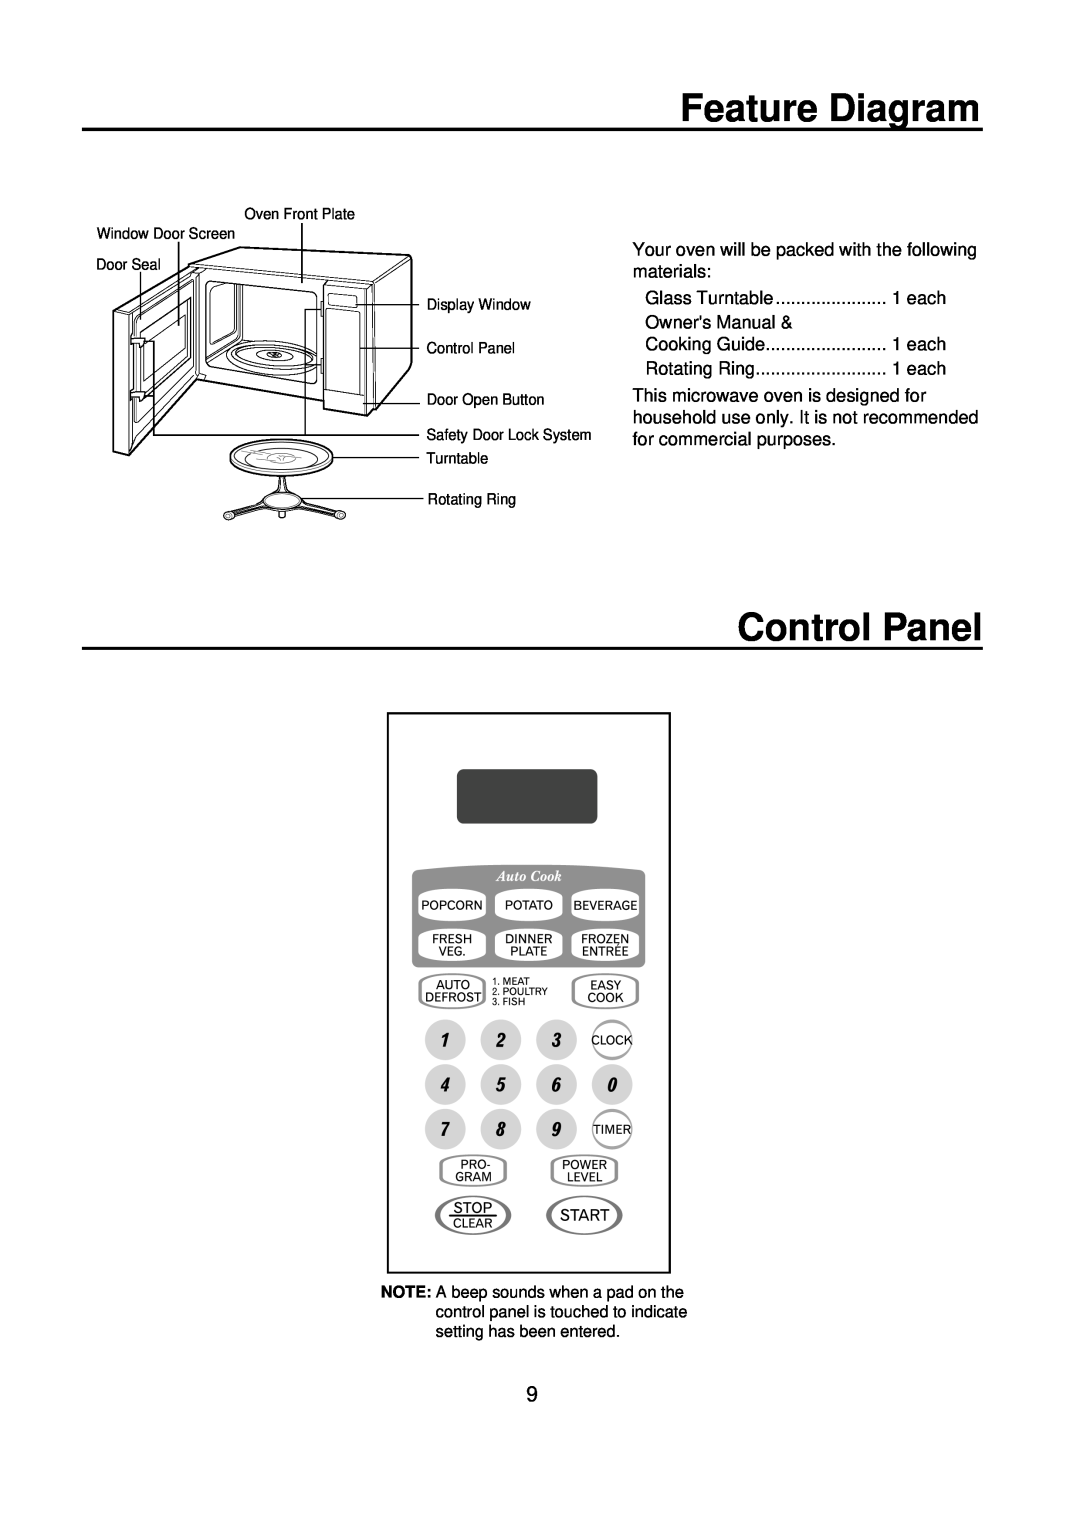 Amana ACM0720A warranty Feature Diagram, each, Cooking Guide, Oven Front Plate, Control Panel 